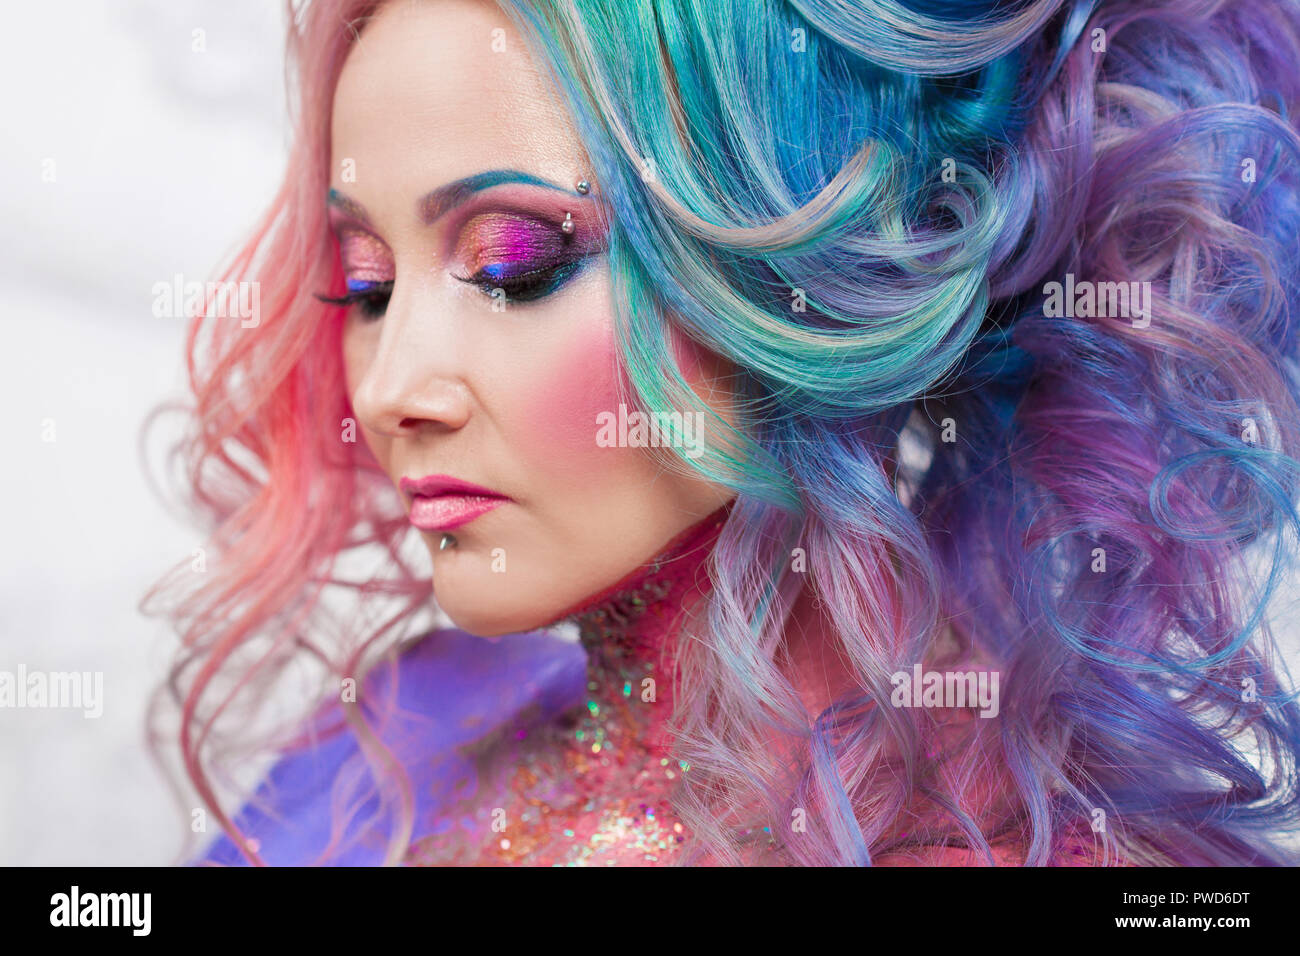 Beautiful woman with bright hair. Bright hair color, hairstyle with the curls. Stock Photo